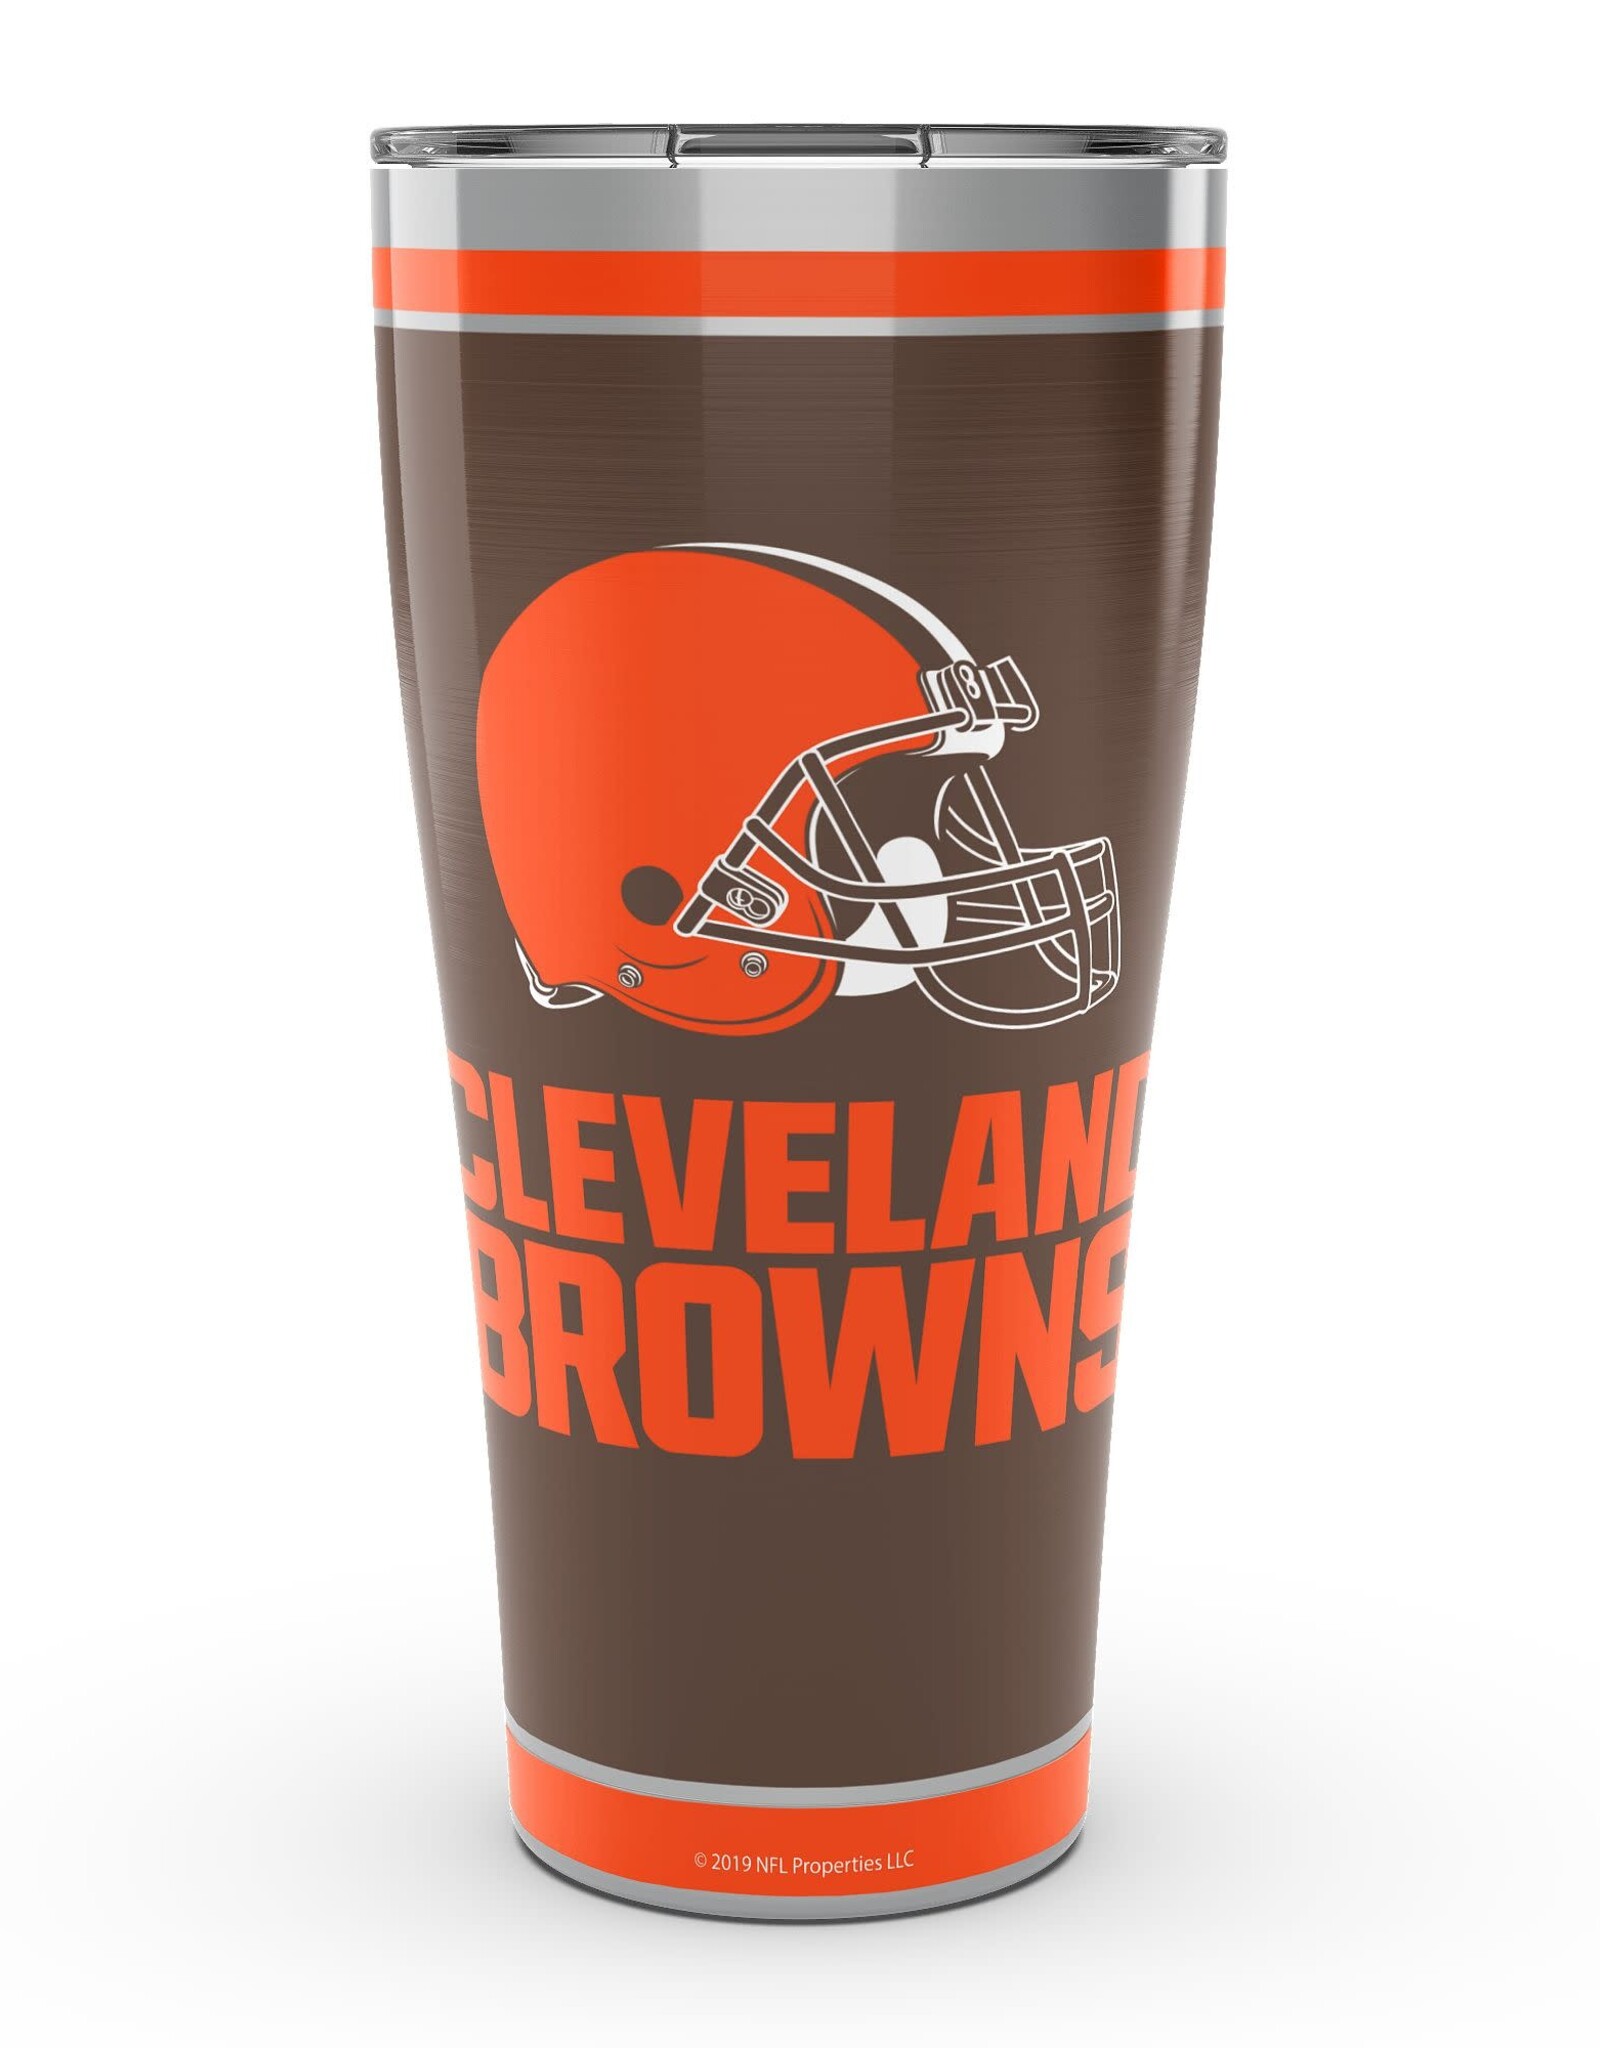 Tervis Cleveland Browns Tervis 30oz Stainless Touchdown Tumbler